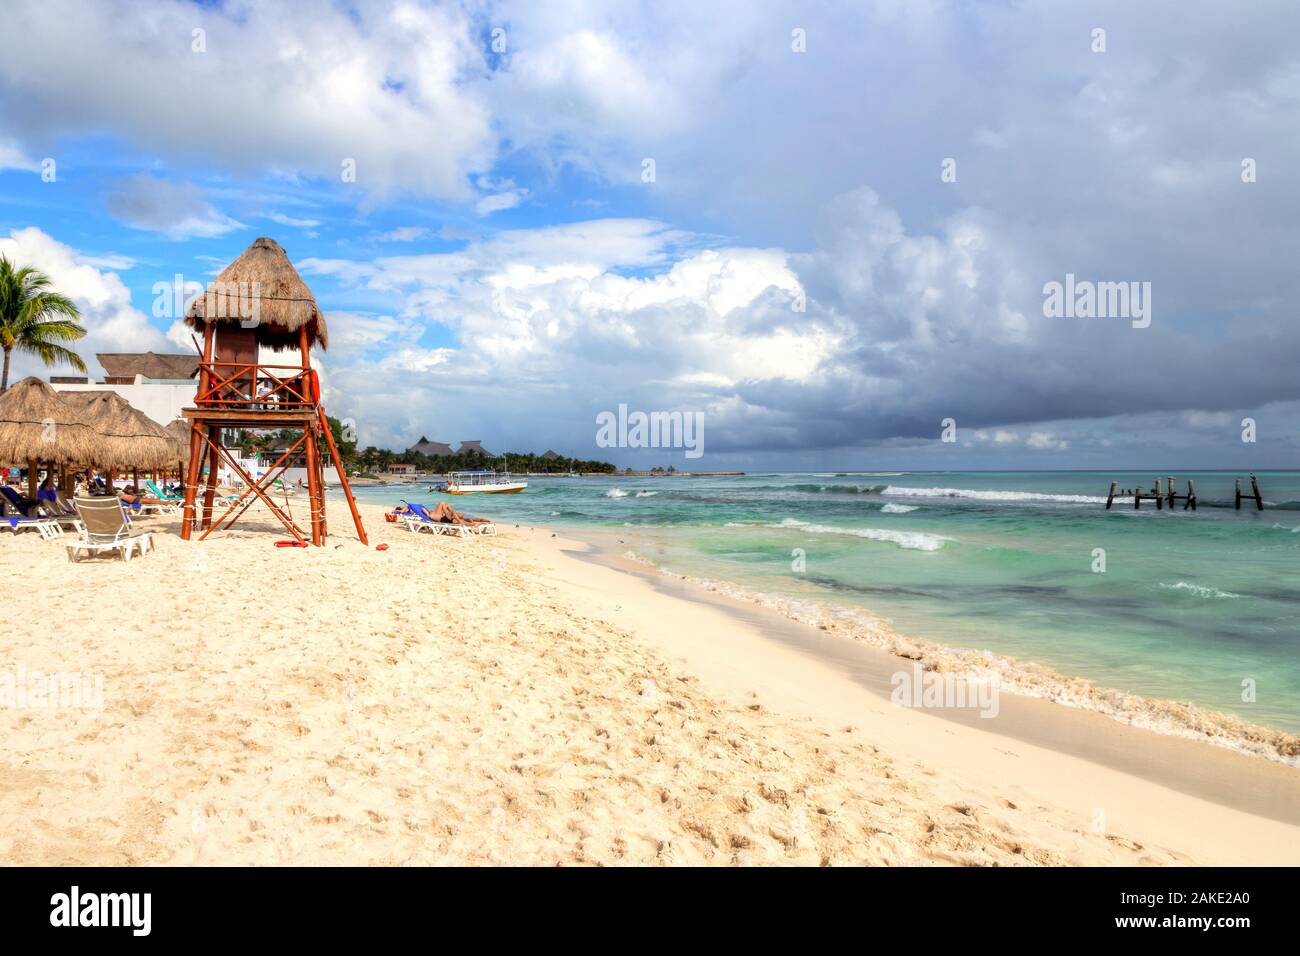 Tropical beaches of Riviera Maya near Cancun, Mexico. Concept of Summer vacation or Winter getaway to the Caribbean Sea. Stock Photo